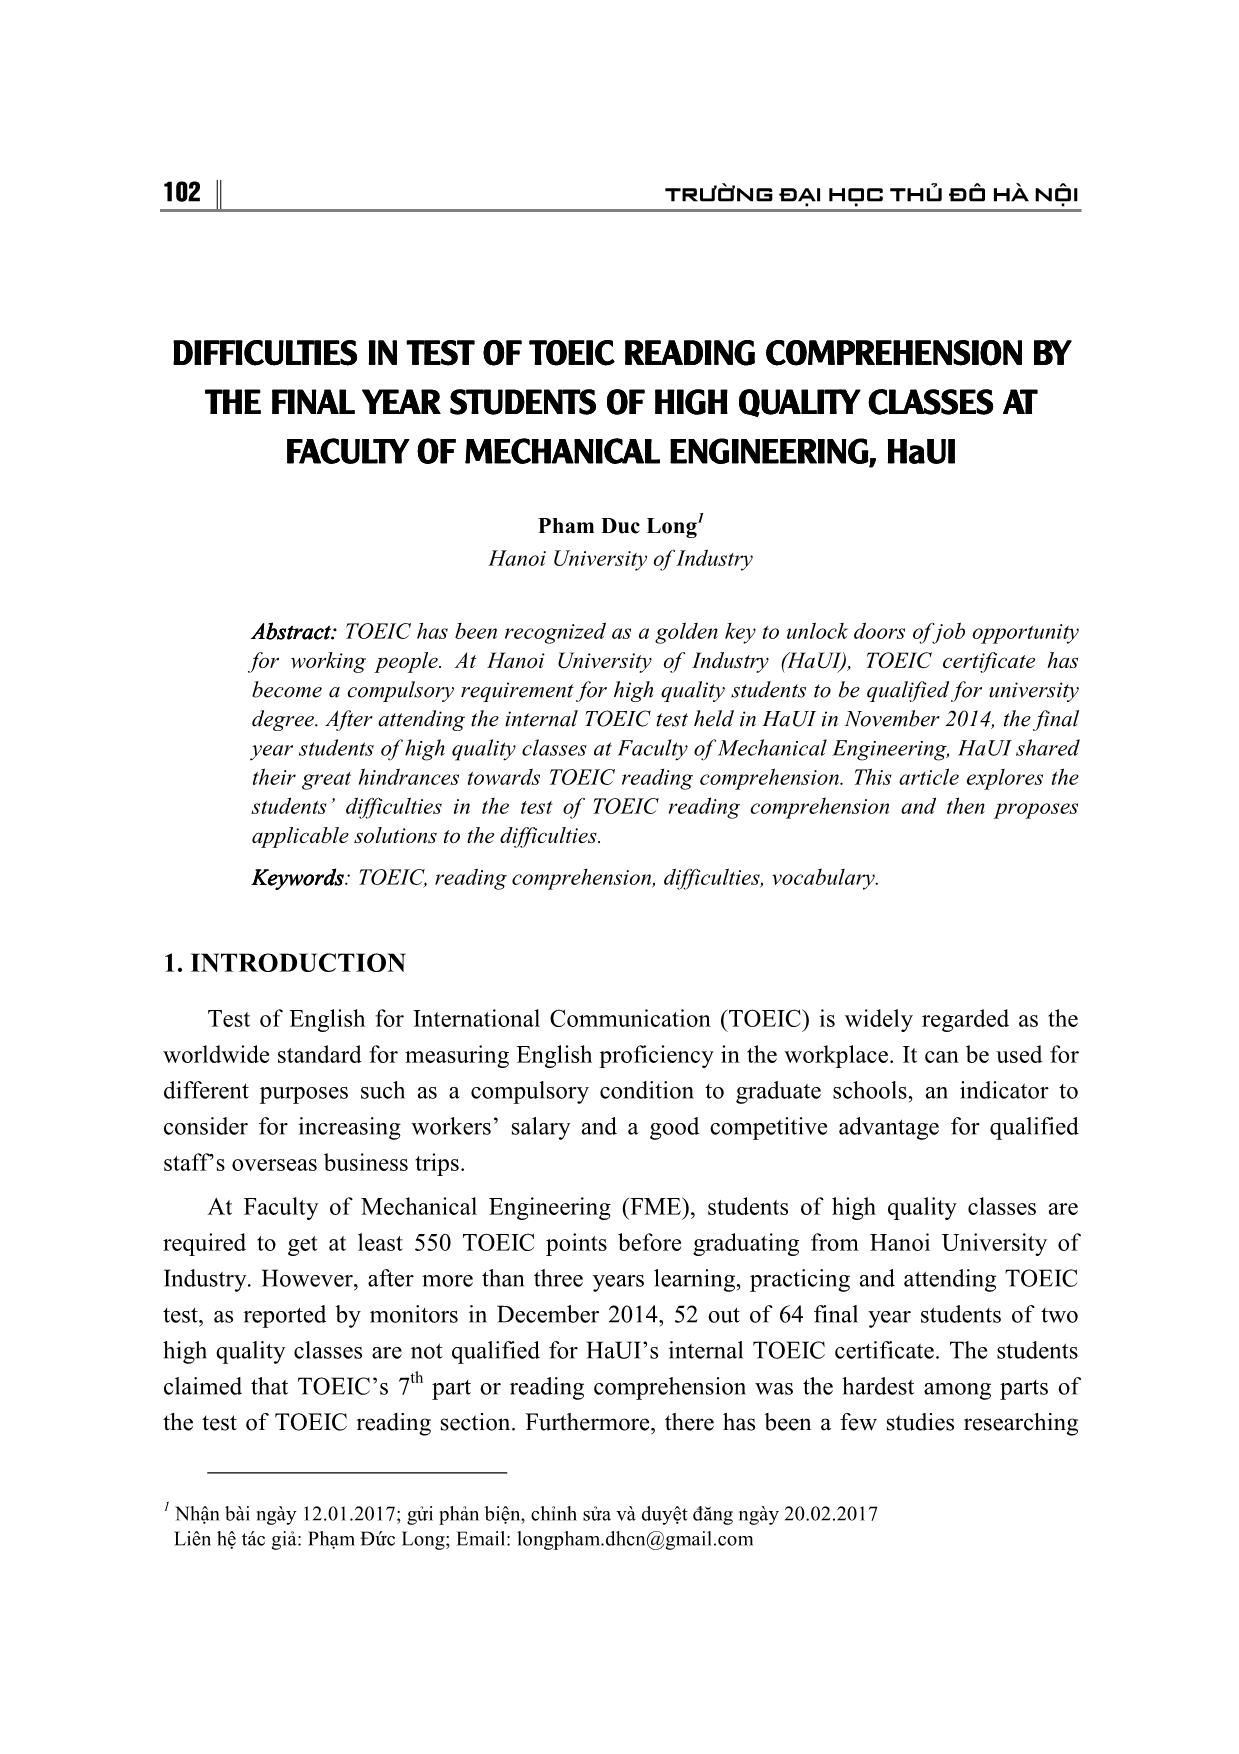 Difficulties in test of Toeic reading comprehension by the final year students of high quality classes at faculty of mechanical engineering, HaUI trang 1